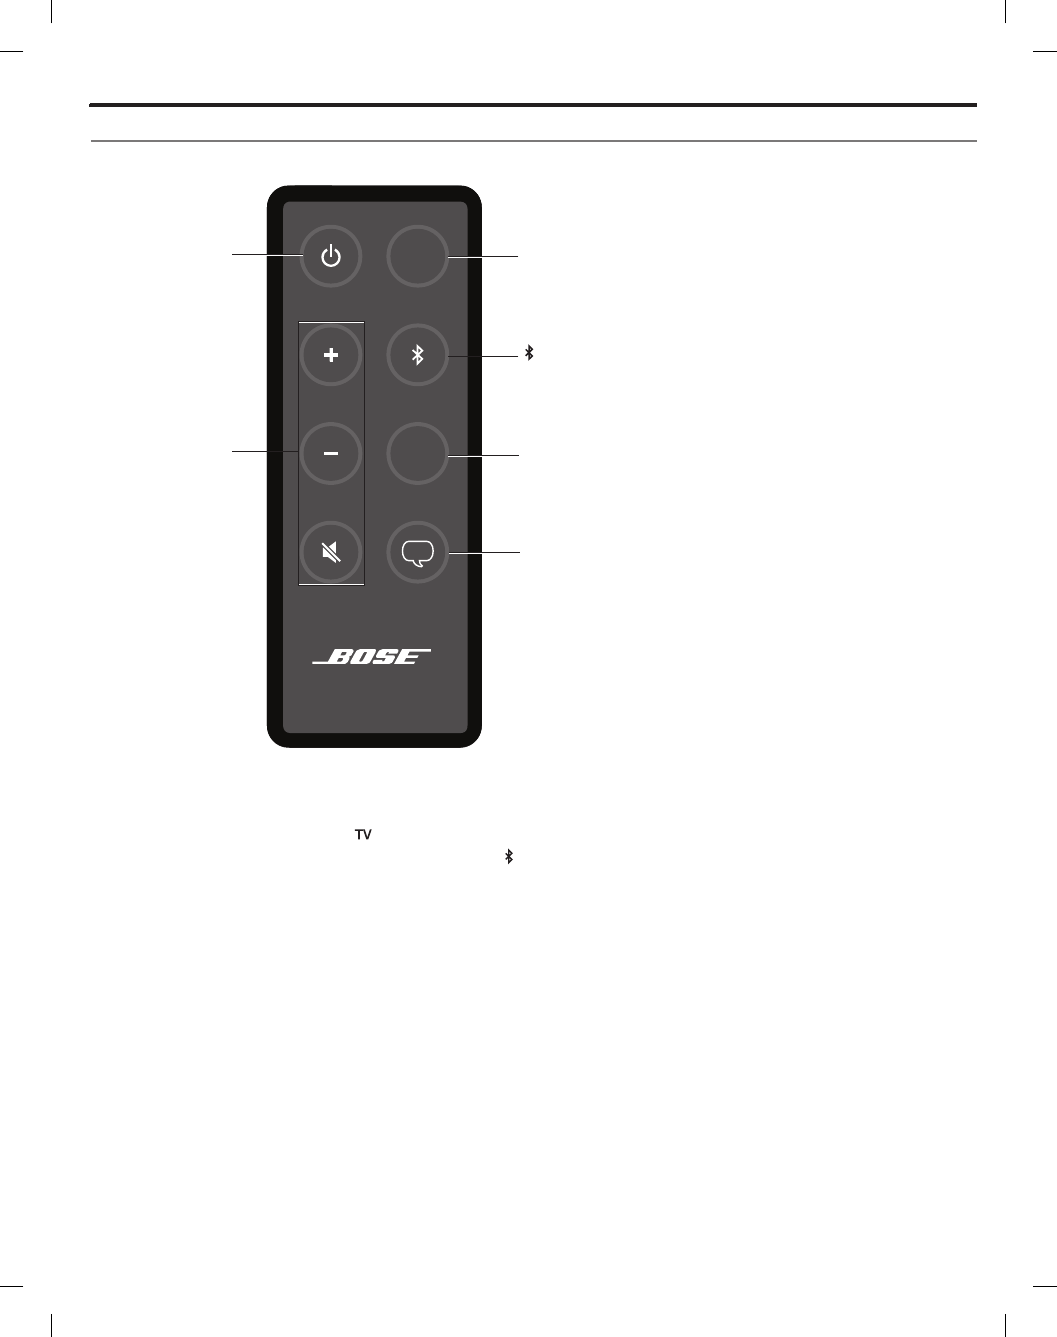 Using the solo 10 series ii system remote control, Switching between your  tv and bluetooth, Device | Bose Solo 15 Series II User Manual | Page 11 / 56